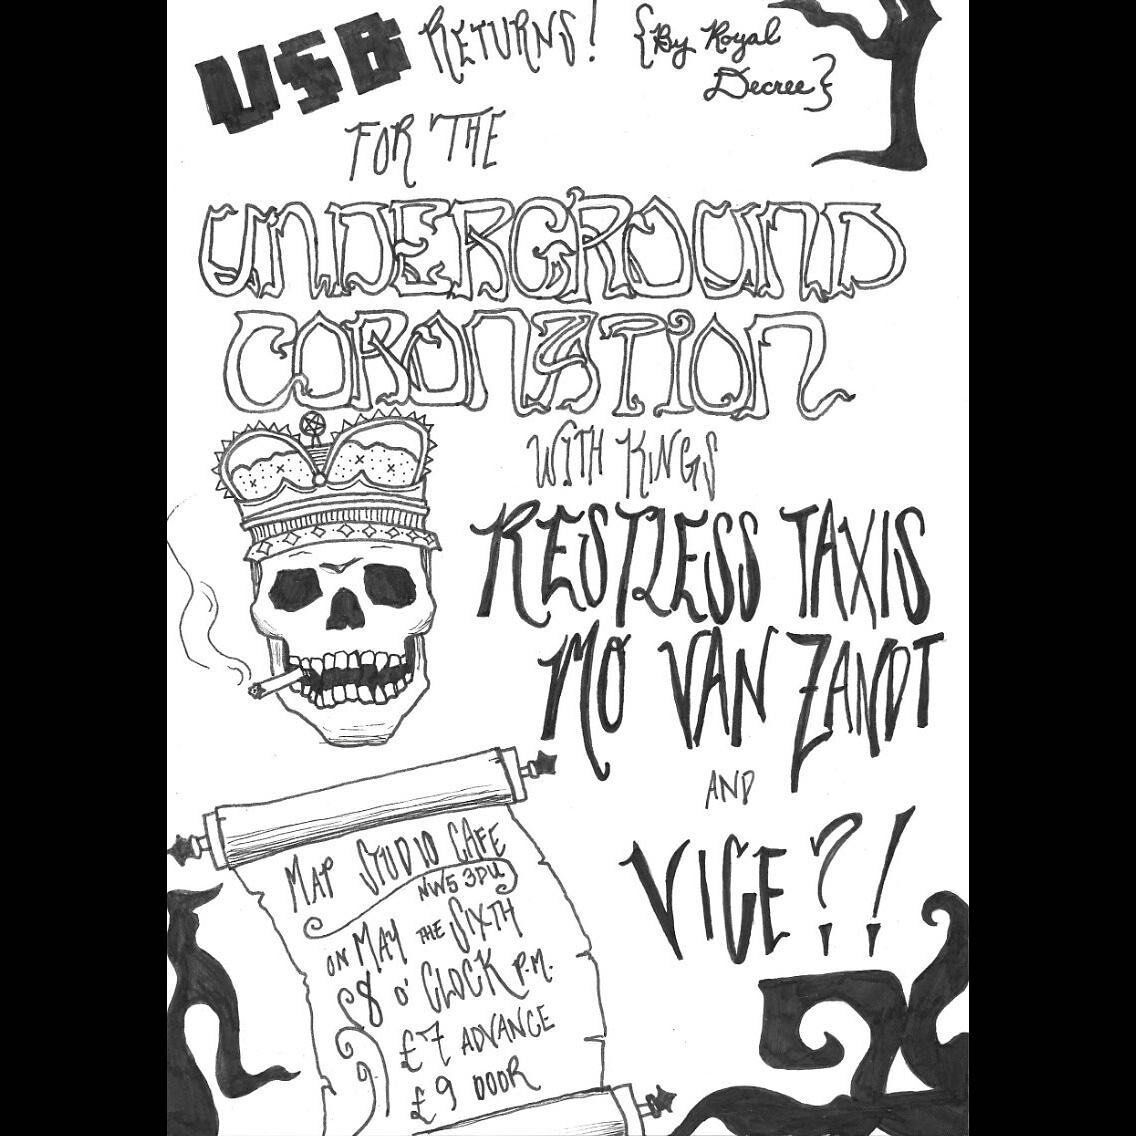 USB is back baby 👑🌐

May 6th we&rsquo;re saying a royal🖕🏾to the coronation &amp; crowning the kings of the Underground. 👑

Pull up to @mapstudiocafe and witness the coronation of Restless Taxis, Mo Van Zandt &amp; Vice?!. 

Tickets link in bio o